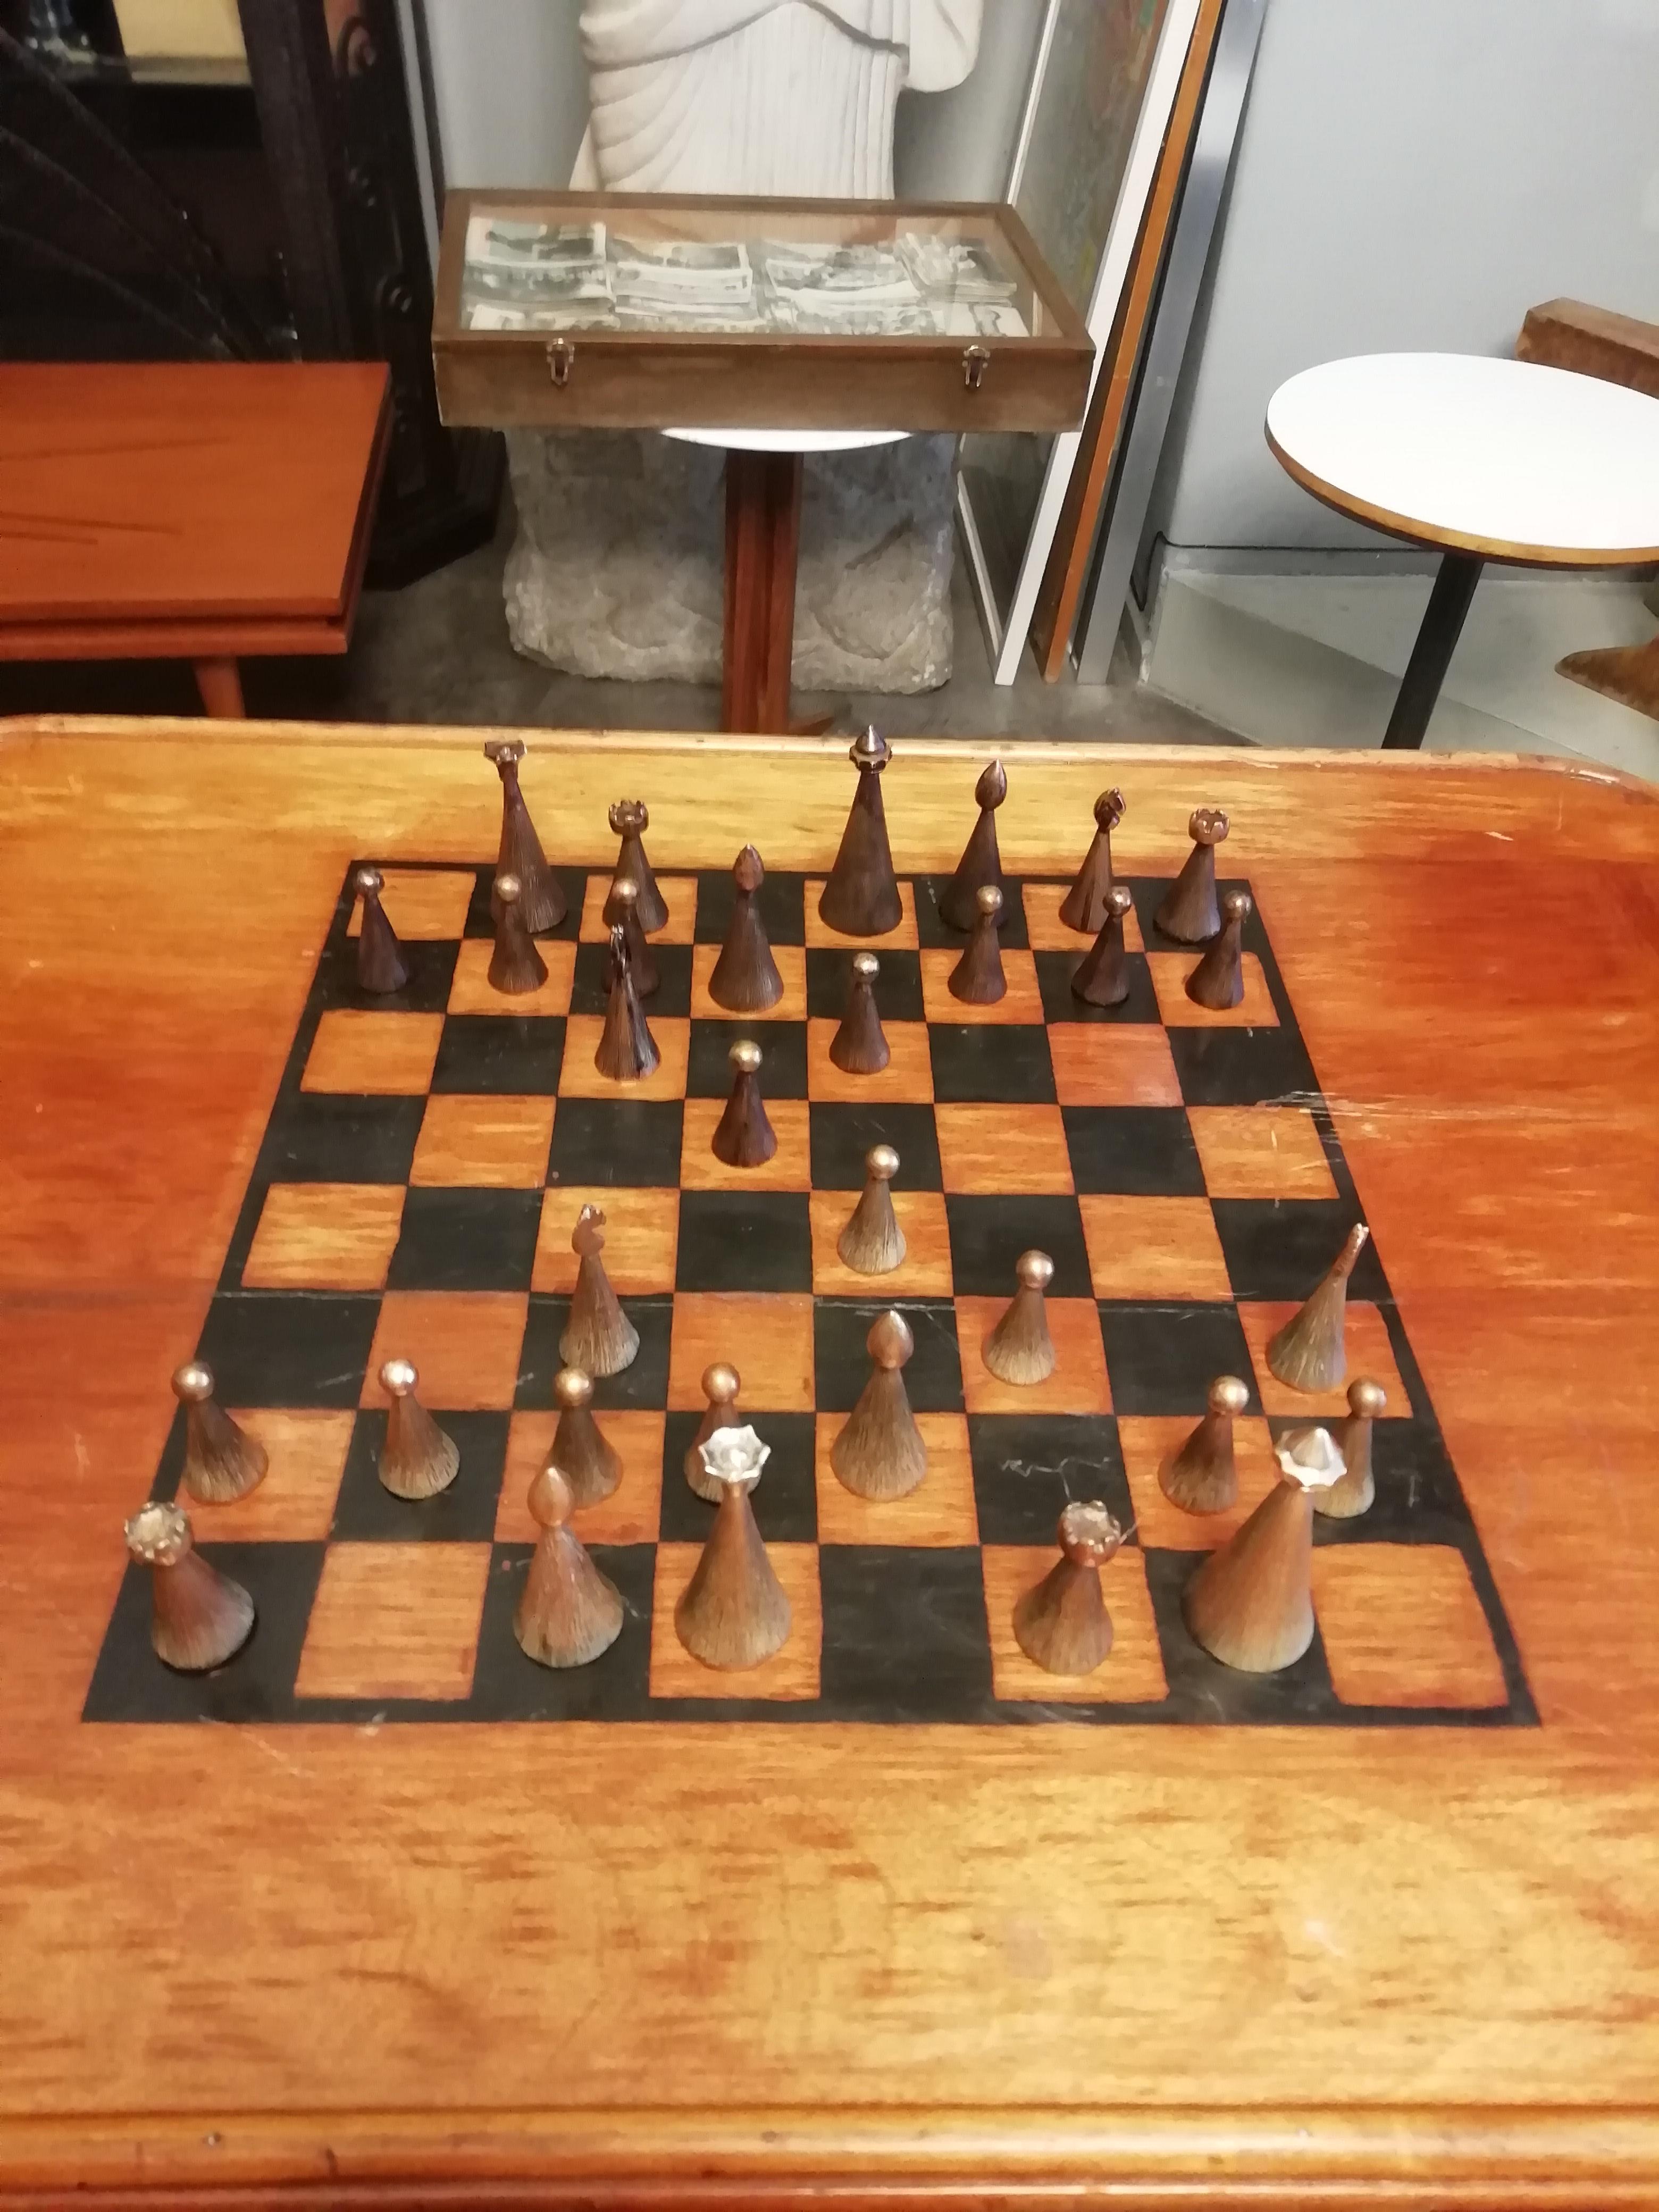 Elegant set of Mexican Mid-Century Modern bronze chess pieces. Available with a walnut harp leg game table. The pieces feature a conic design with copper heads. The chess pieces are complete to play with them.

Table's dimensions: 77 x 80 x 56 cm.